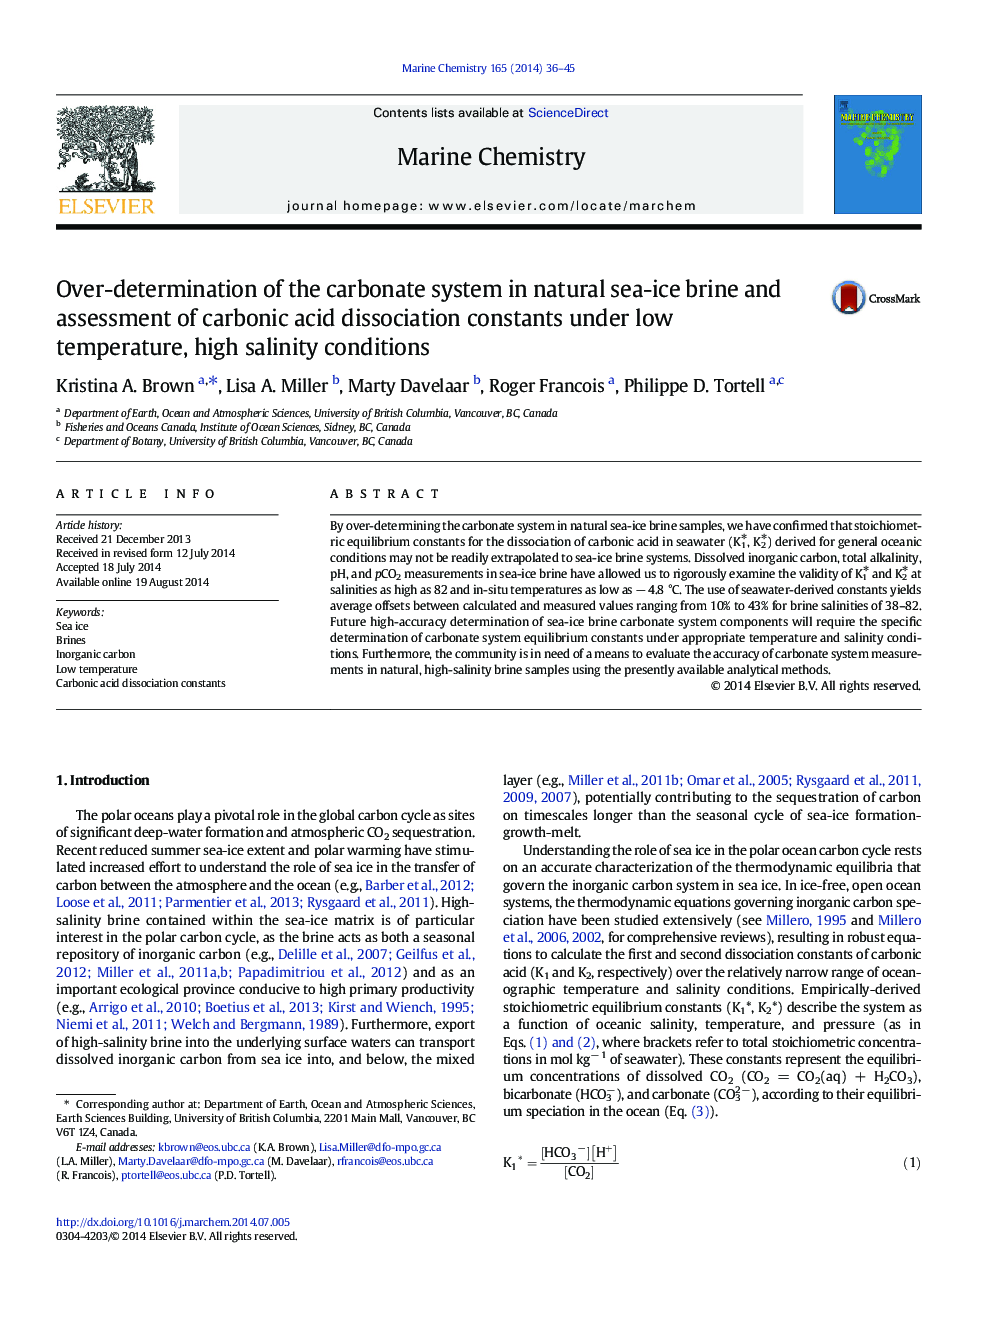 Over-determination of the carbonate system in natural sea-ice brine and assessment of carbonic acid dissociation constants under low temperature, high salinity conditions